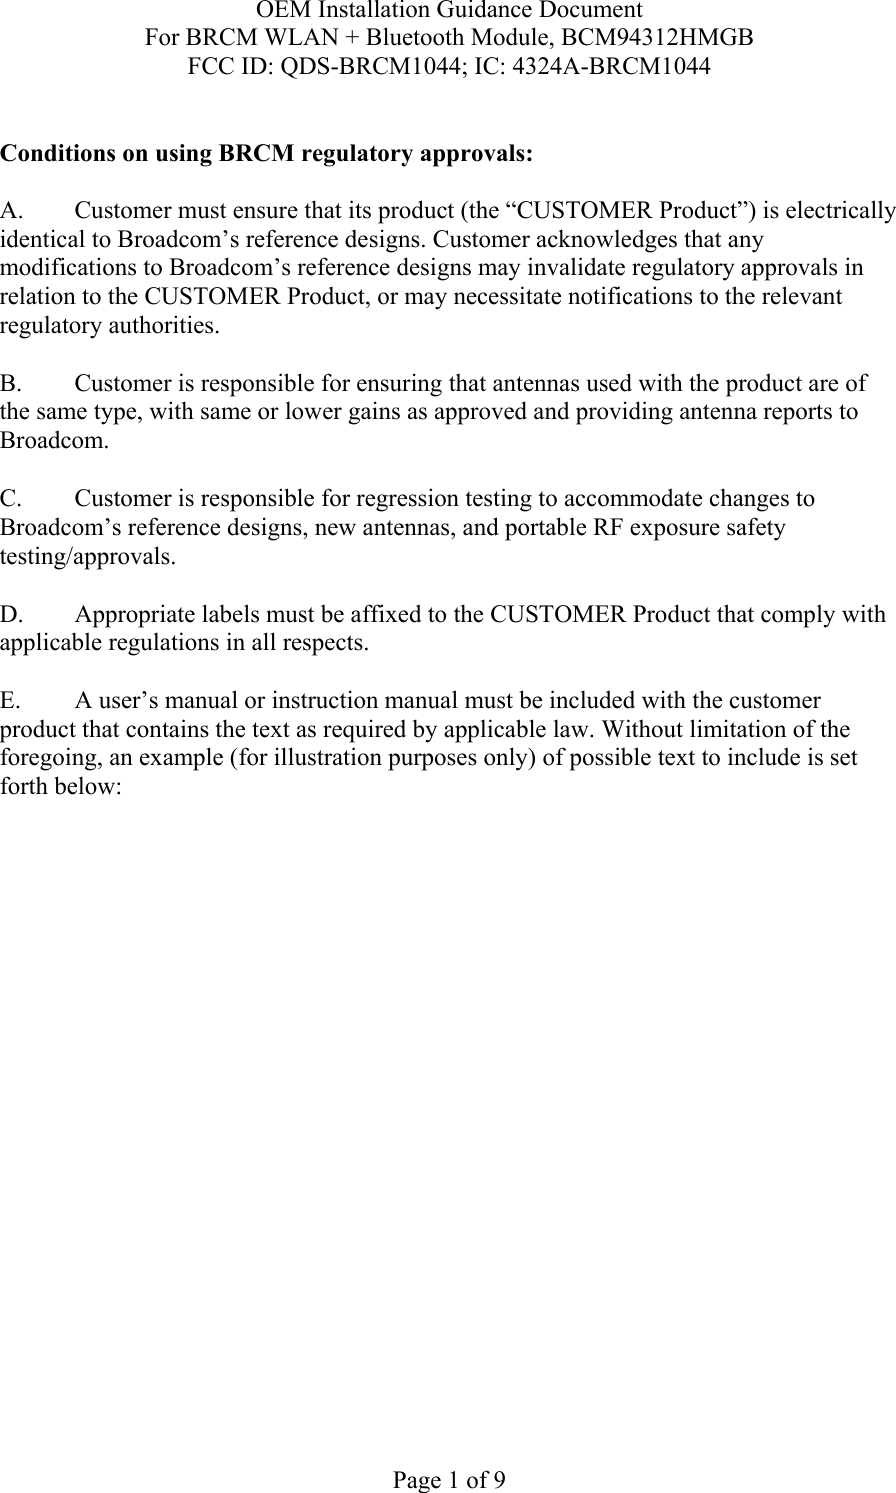 OEM Installation Guidance Document For BRCM WLAN + Bluetooth Module, BCM94312HMGB FCC ID: QDS-BRCM1044; IC: 4324A-BRCM1044  Page 1 of 9  Conditions on using BRCM regulatory approvals:   A.  Customer must ensure that its product (the “CUSTOMER Product”) is electrically identical to Broadcom’s reference designs. Customer acknowledges that any modifications to Broadcom’s reference designs may invalidate regulatory approvals in relation to the CUSTOMER Product, or may necessitate notifications to the relevant regulatory authorities.  B.   Customer is responsible for ensuring that antennas used with the product are of the same type, with same or lower gains as approved and providing antenna reports to Broadcom.  C.   Customer is responsible for regression testing to accommodate changes to Broadcom’s reference designs, new antennas, and portable RF exposure safety testing/approvals.  D.  Appropriate labels must be affixed to the CUSTOMER Product that comply with applicable regulations in all respects.    E.  A user’s manual or instruction manual must be included with the customer product that contains the text as required by applicable law. Without limitation of the foregoing, an example (for illustration purposes only) of possible text to include is set forth below:    